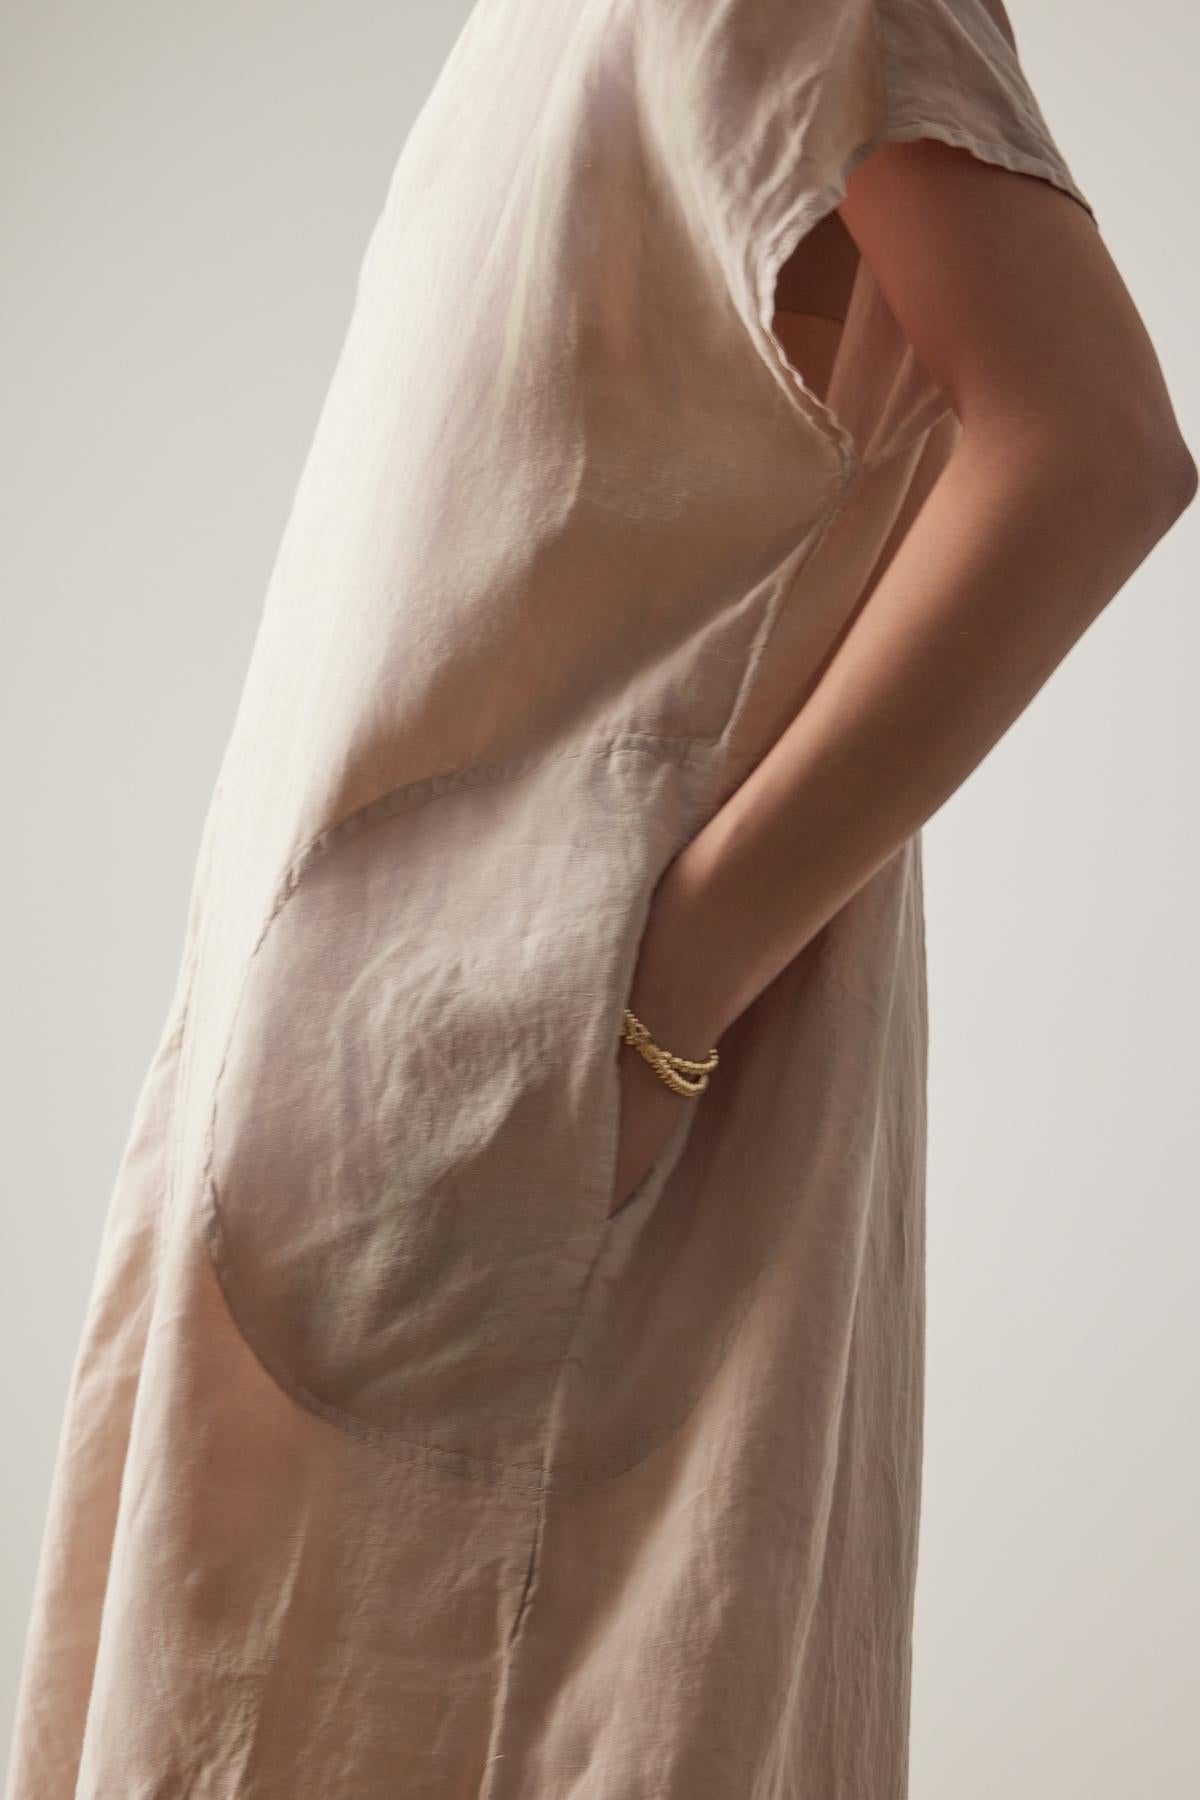 A close-up of a person in a Velvet by Jenny Graham Montana linen dress with a large pocket, highlighting a detail of a gold bracelet on their arm.-36863315312833